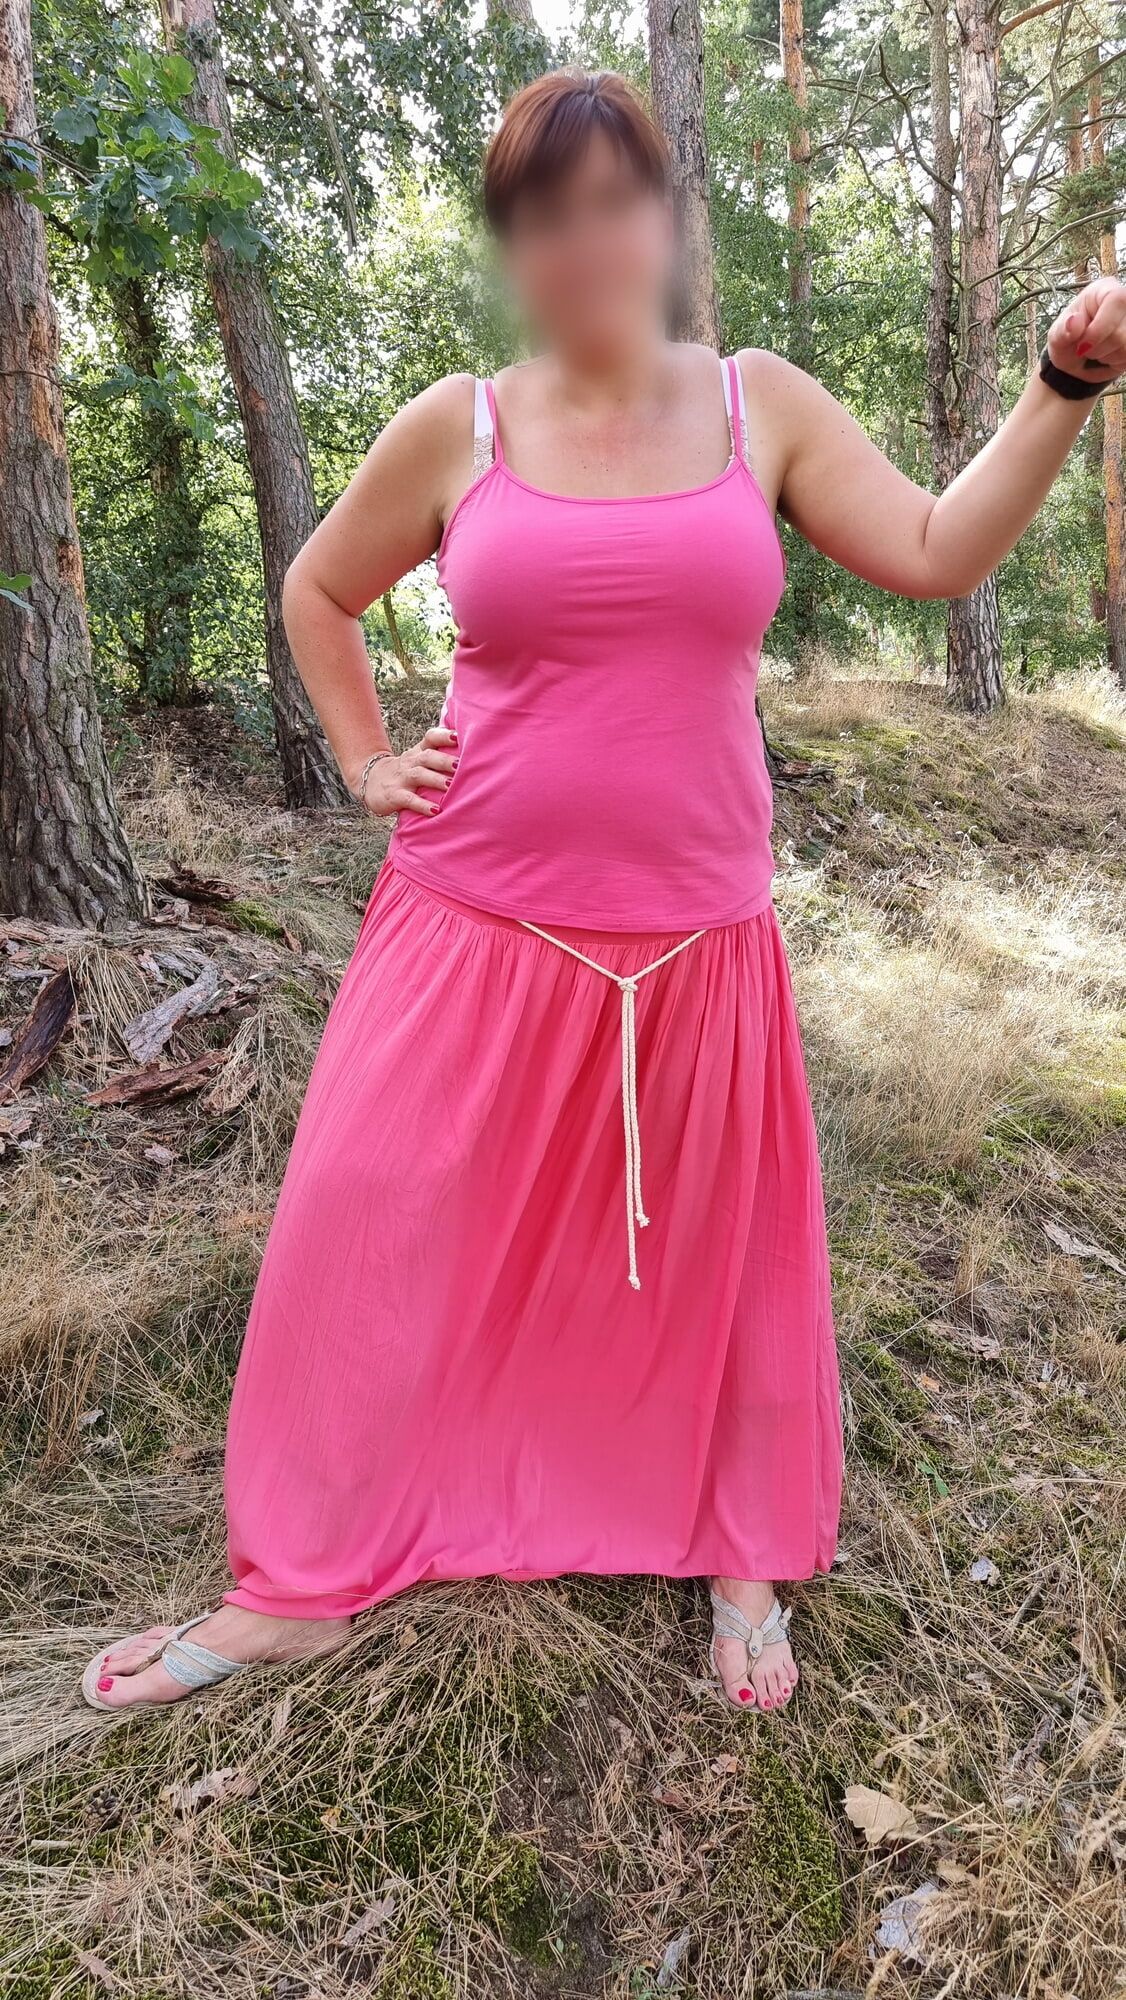 busty milf showing off in nature